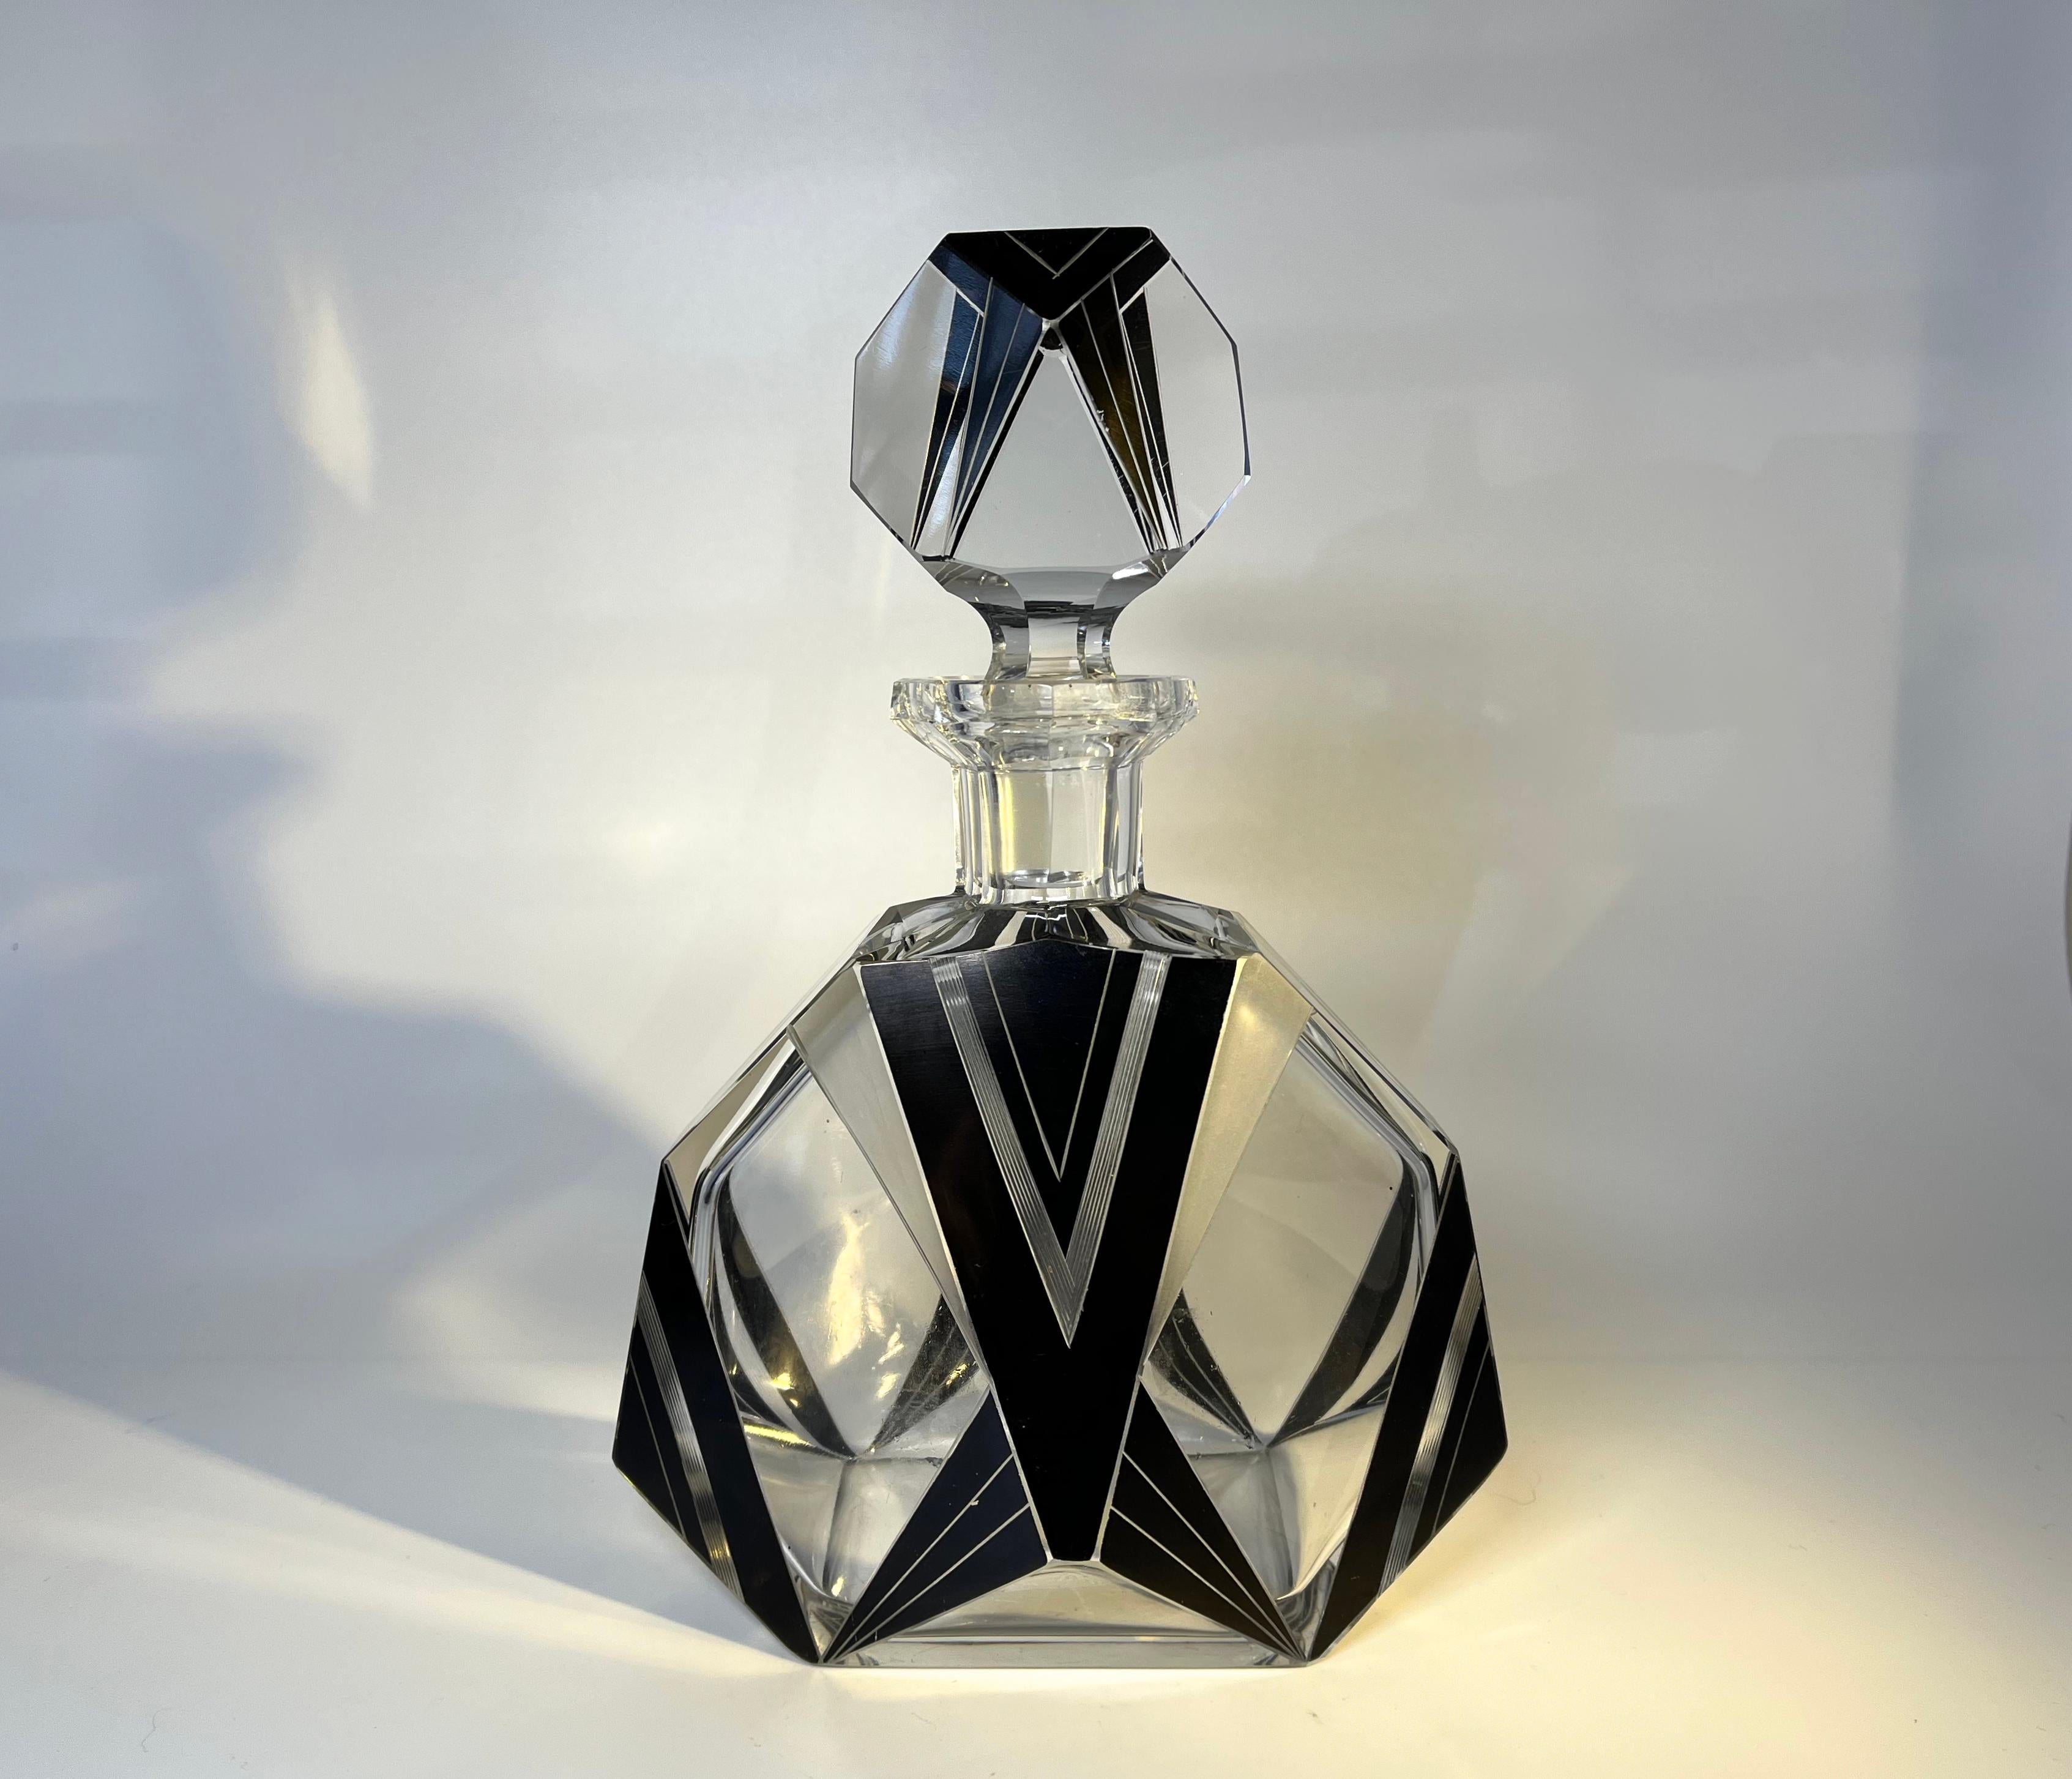 Showstopping and voguish, oversized Czech crystal Art Deco flacon with black enamel geometric pattern
Perfect size for either cologne or liqueur
A superbly stylish weighty decanter and faceted crystal stopper,
Vintage Bohemian, Czech crystal